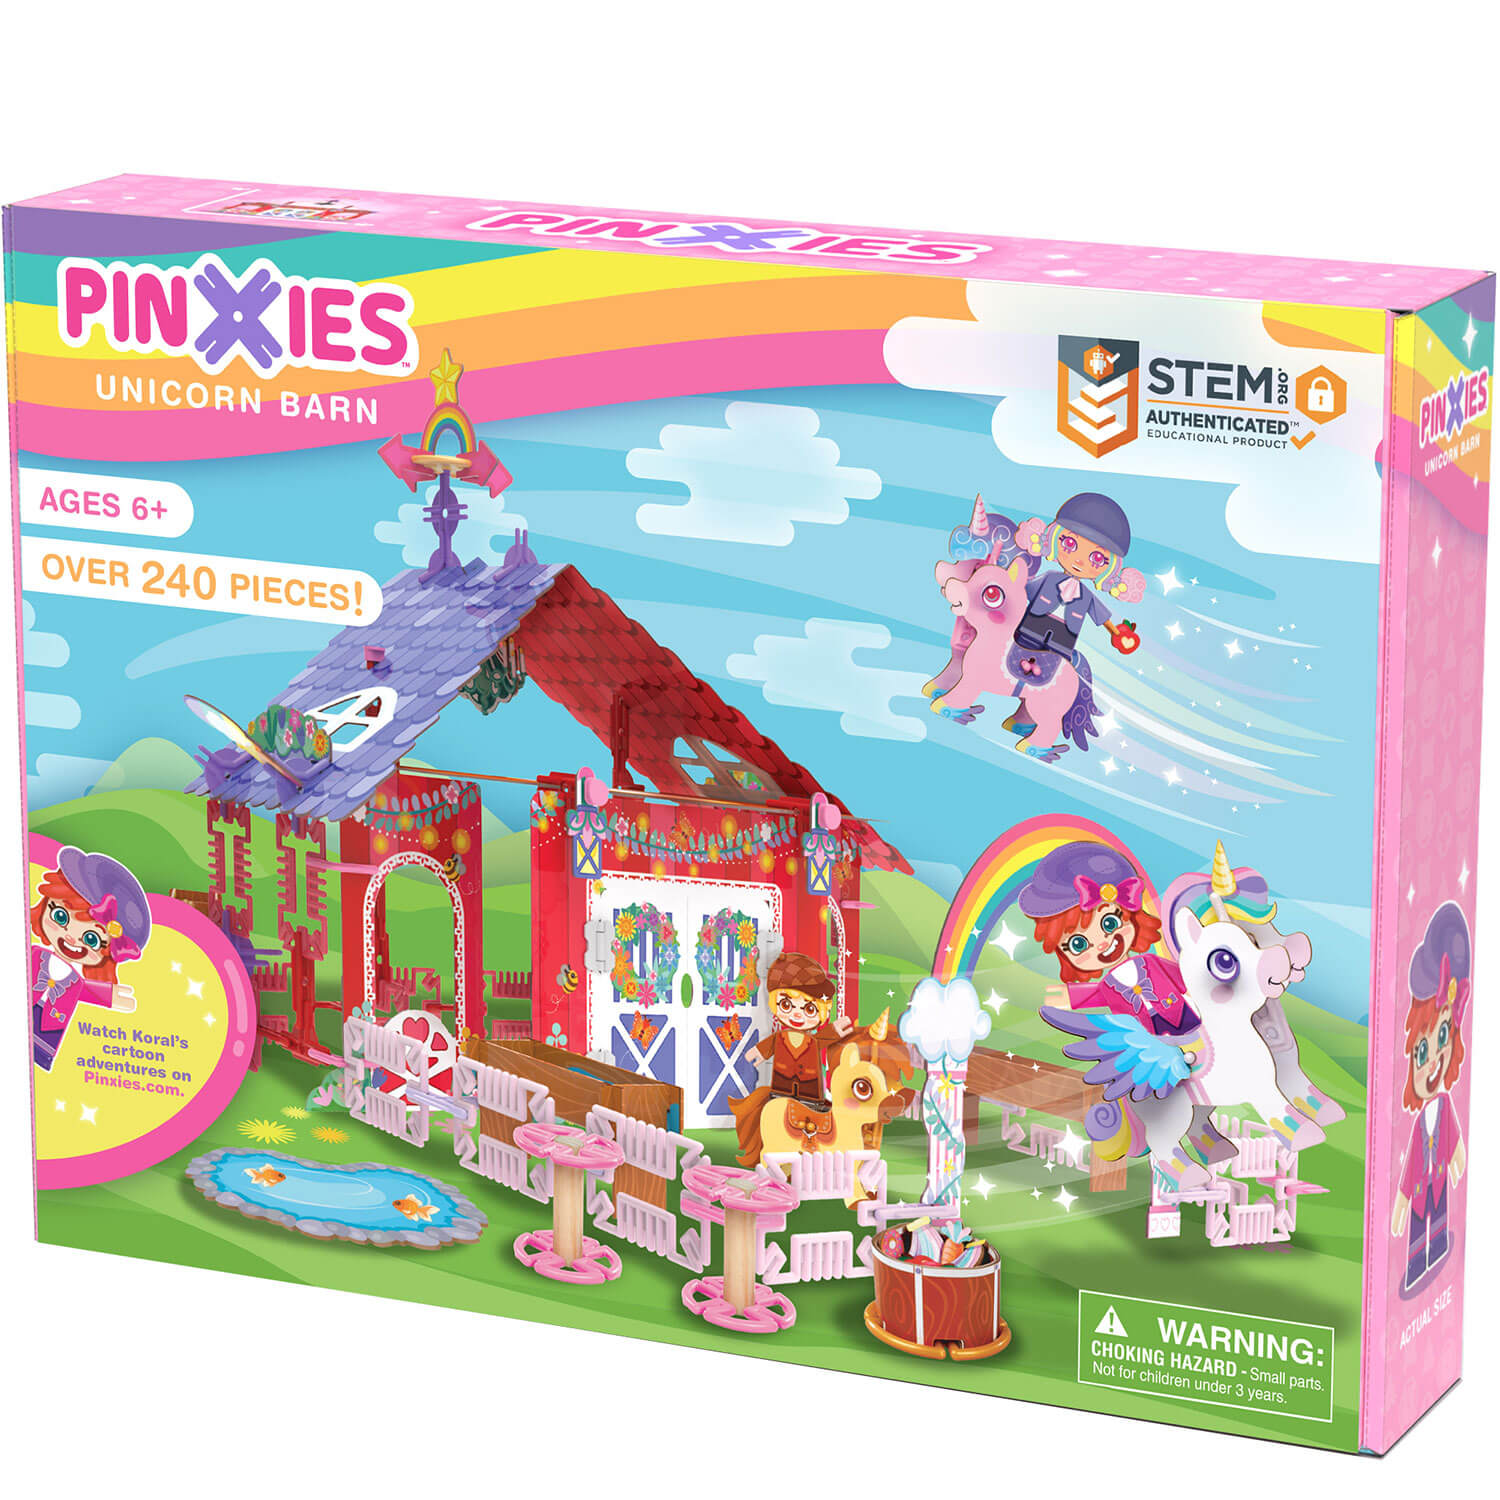 Pinxies Unicorn Barn is a STEM authenticated building set for ages 6+